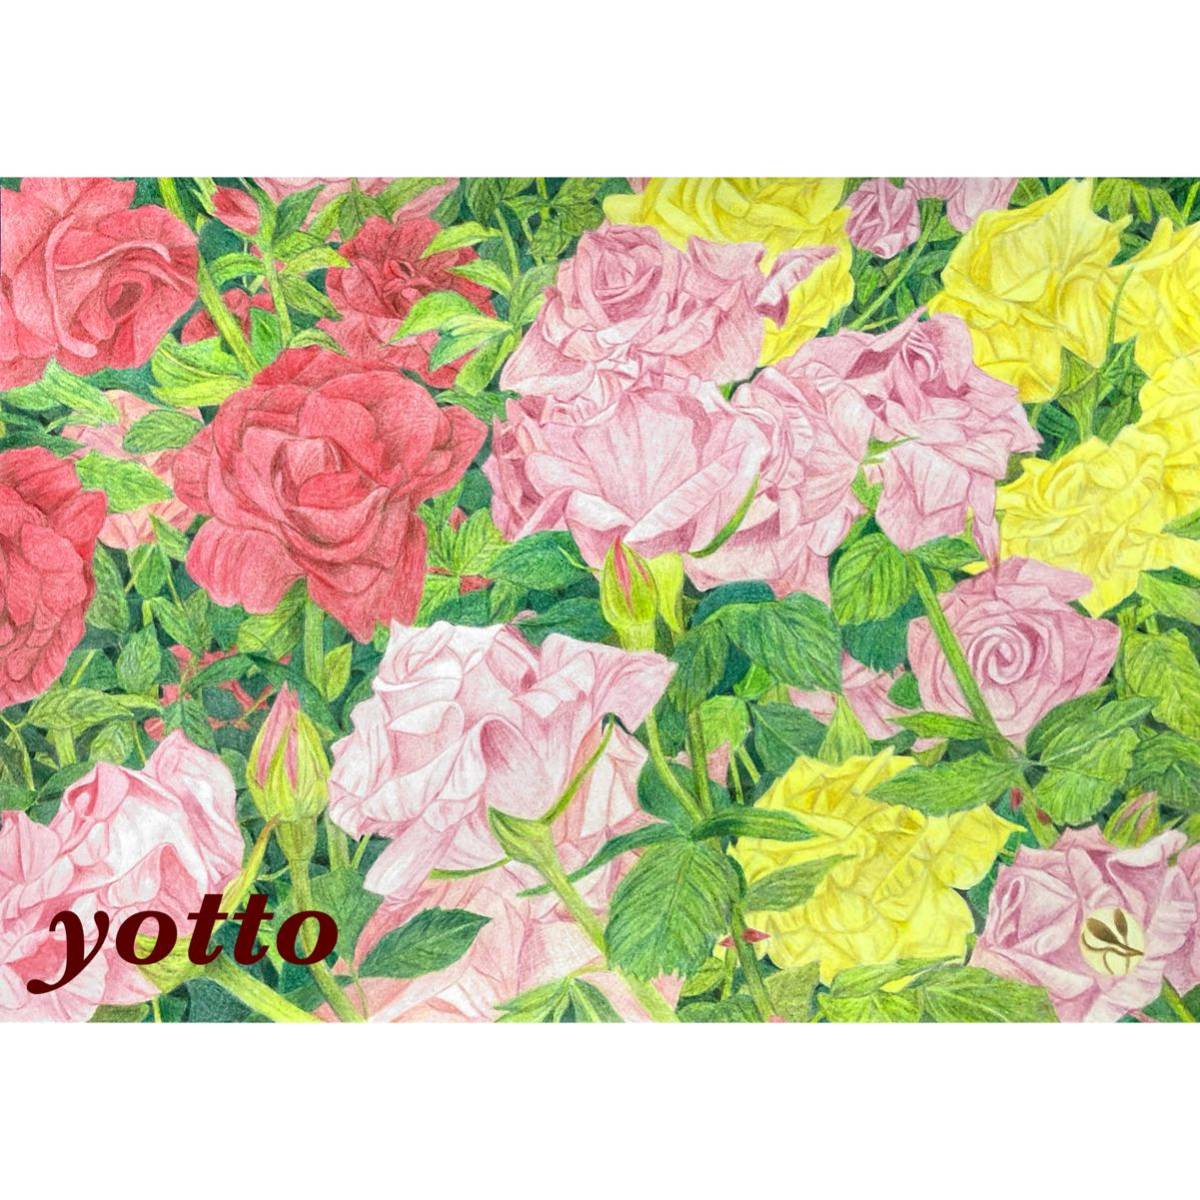 Colored pencil drawing Landscape with roses 10 A4 size with frame ◇◆Hand-drawn ◇Original drawing ◆Rose◇◆yotto, artwork, painting, pencil drawing, charcoal drawing